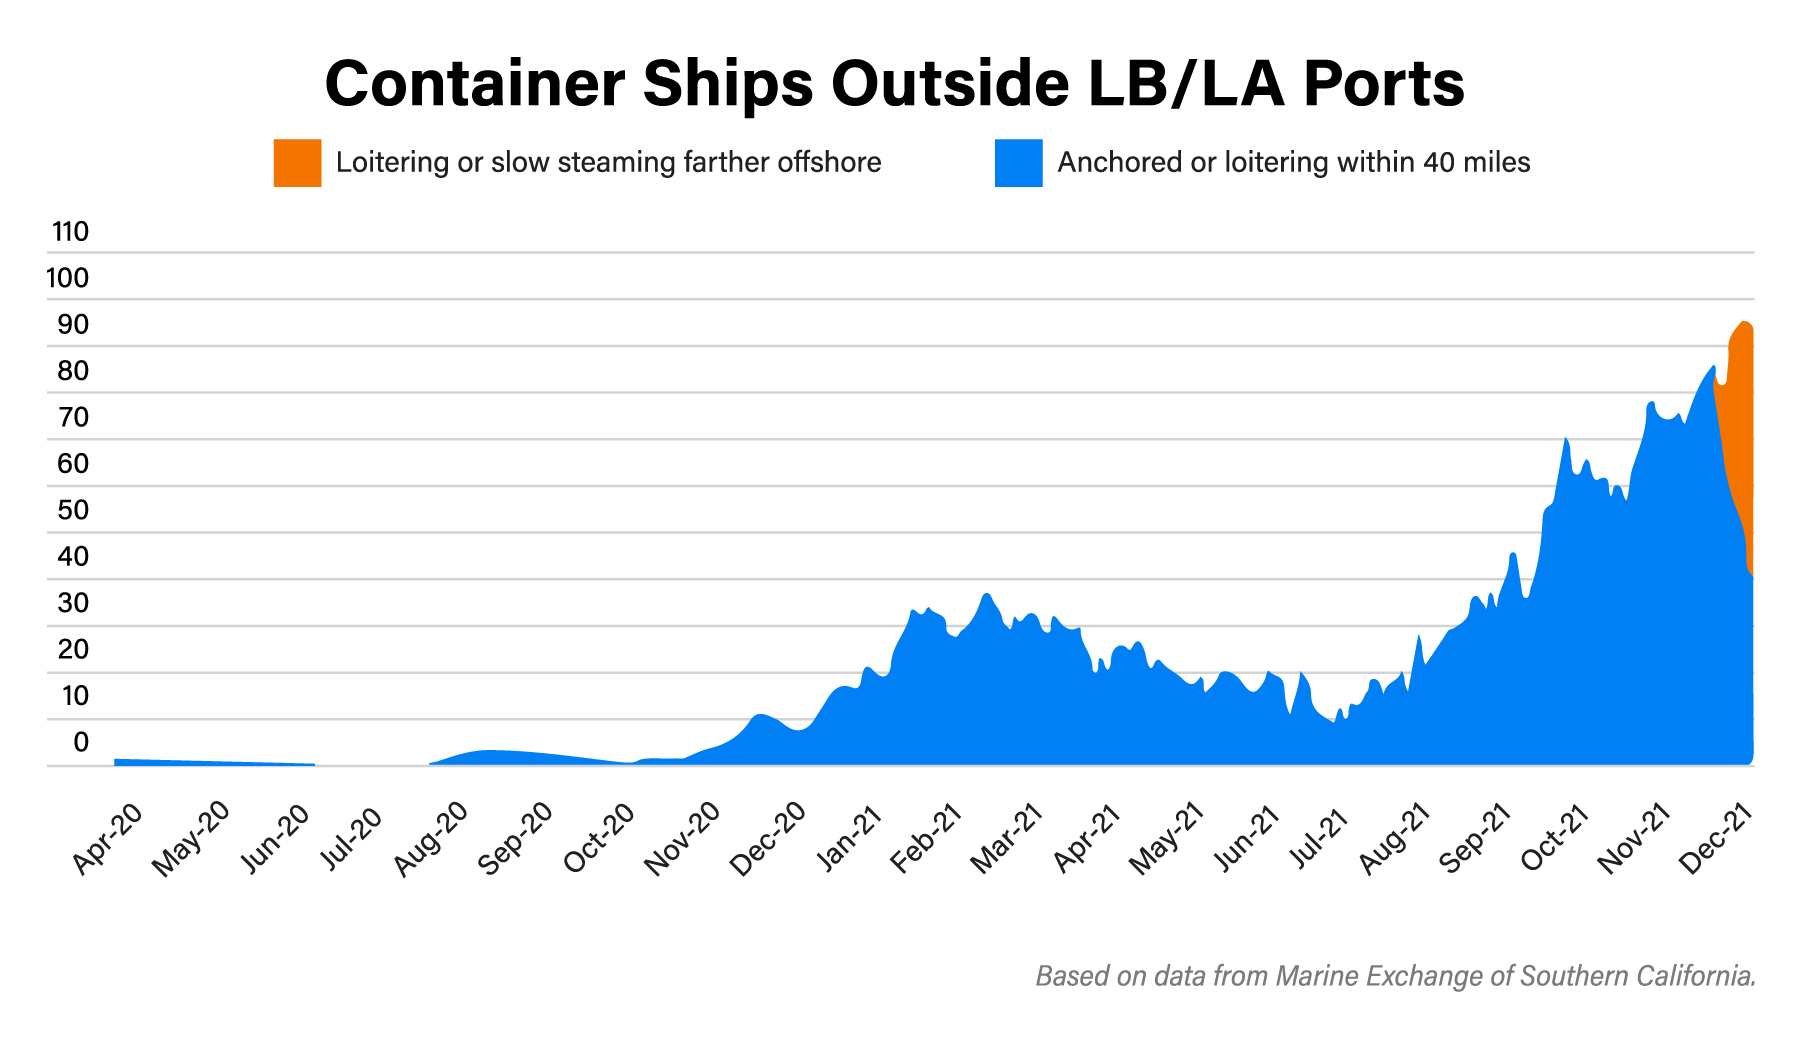 Chart showing the number of container ships at California ports 2020-2022